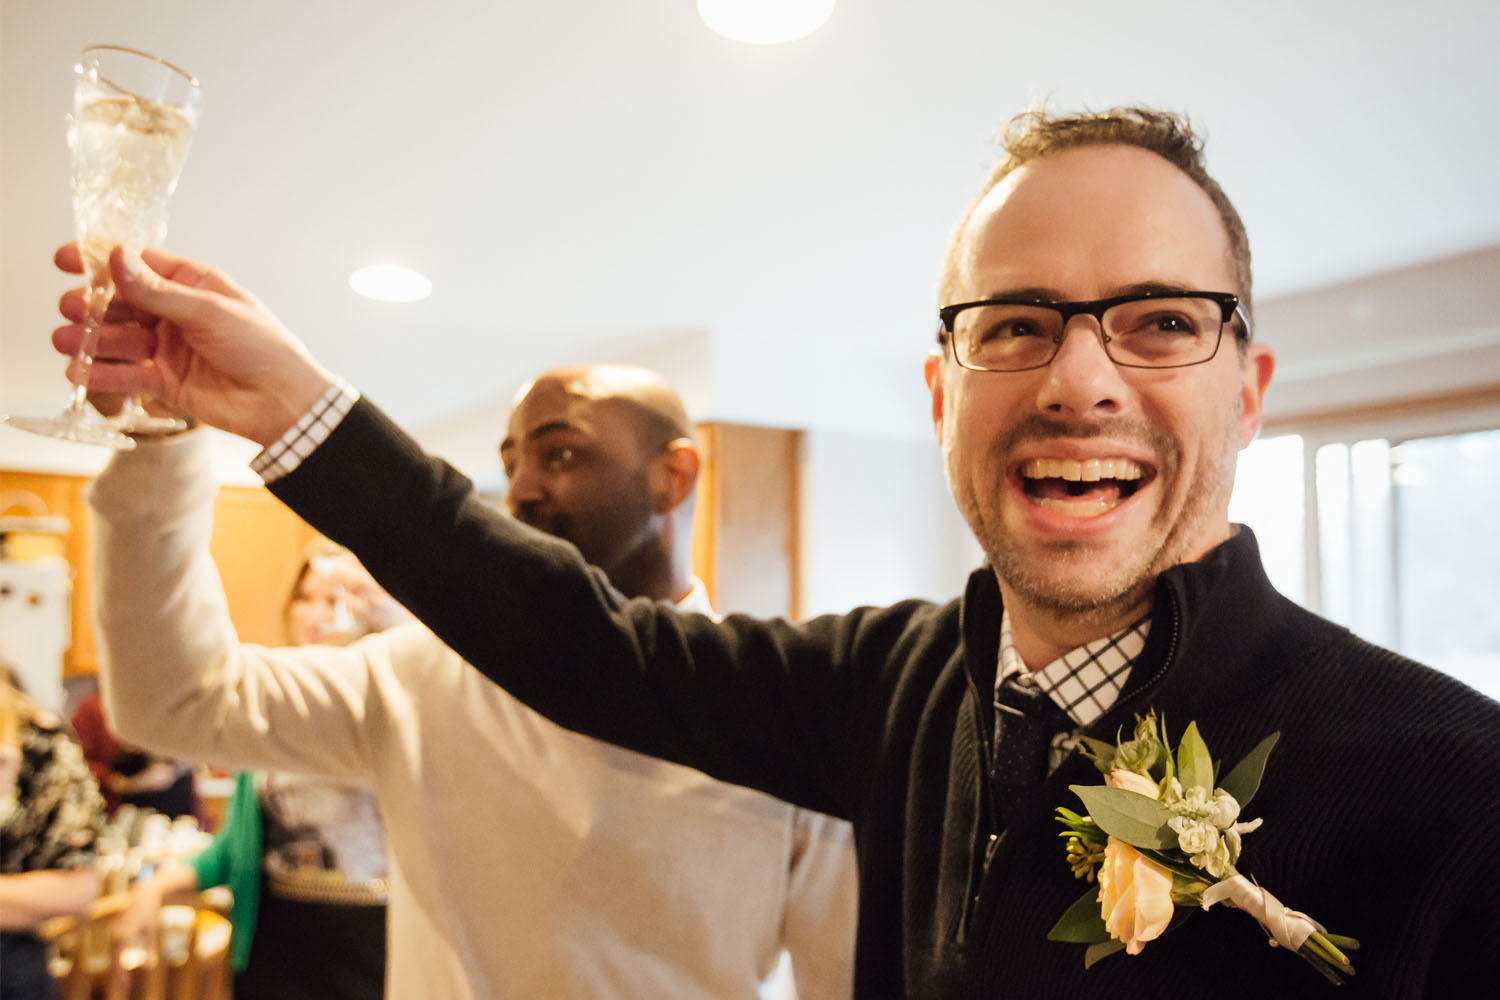 Second image: Phillip Jefferies (front) and Lance Lewis are shown smiling and toasting their union at their wedding.  